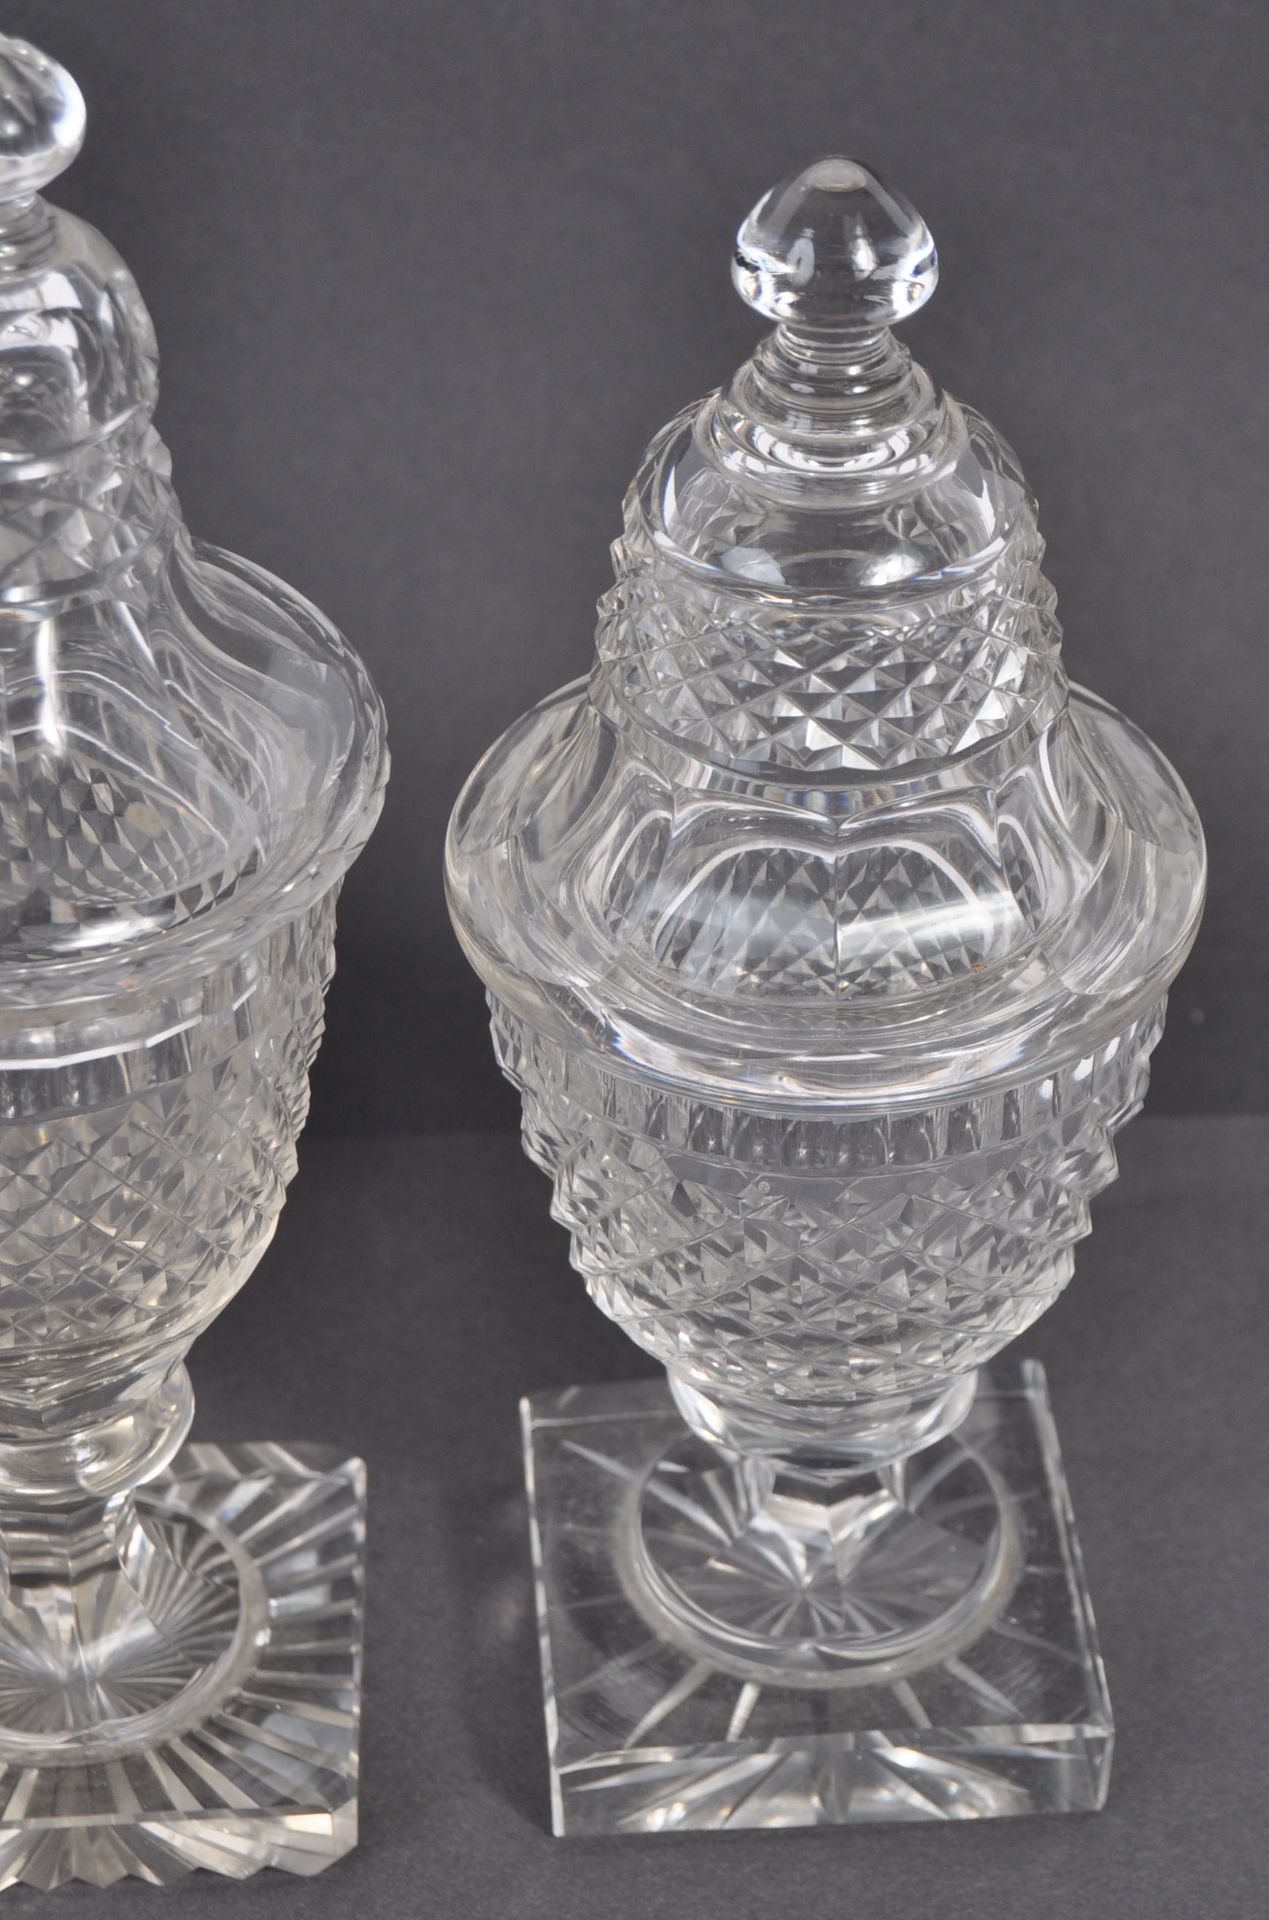 SET OF THREE EARLY 19TH CENTURY ANTIQUE GLASS LIDDED URNS - Image 4 of 4